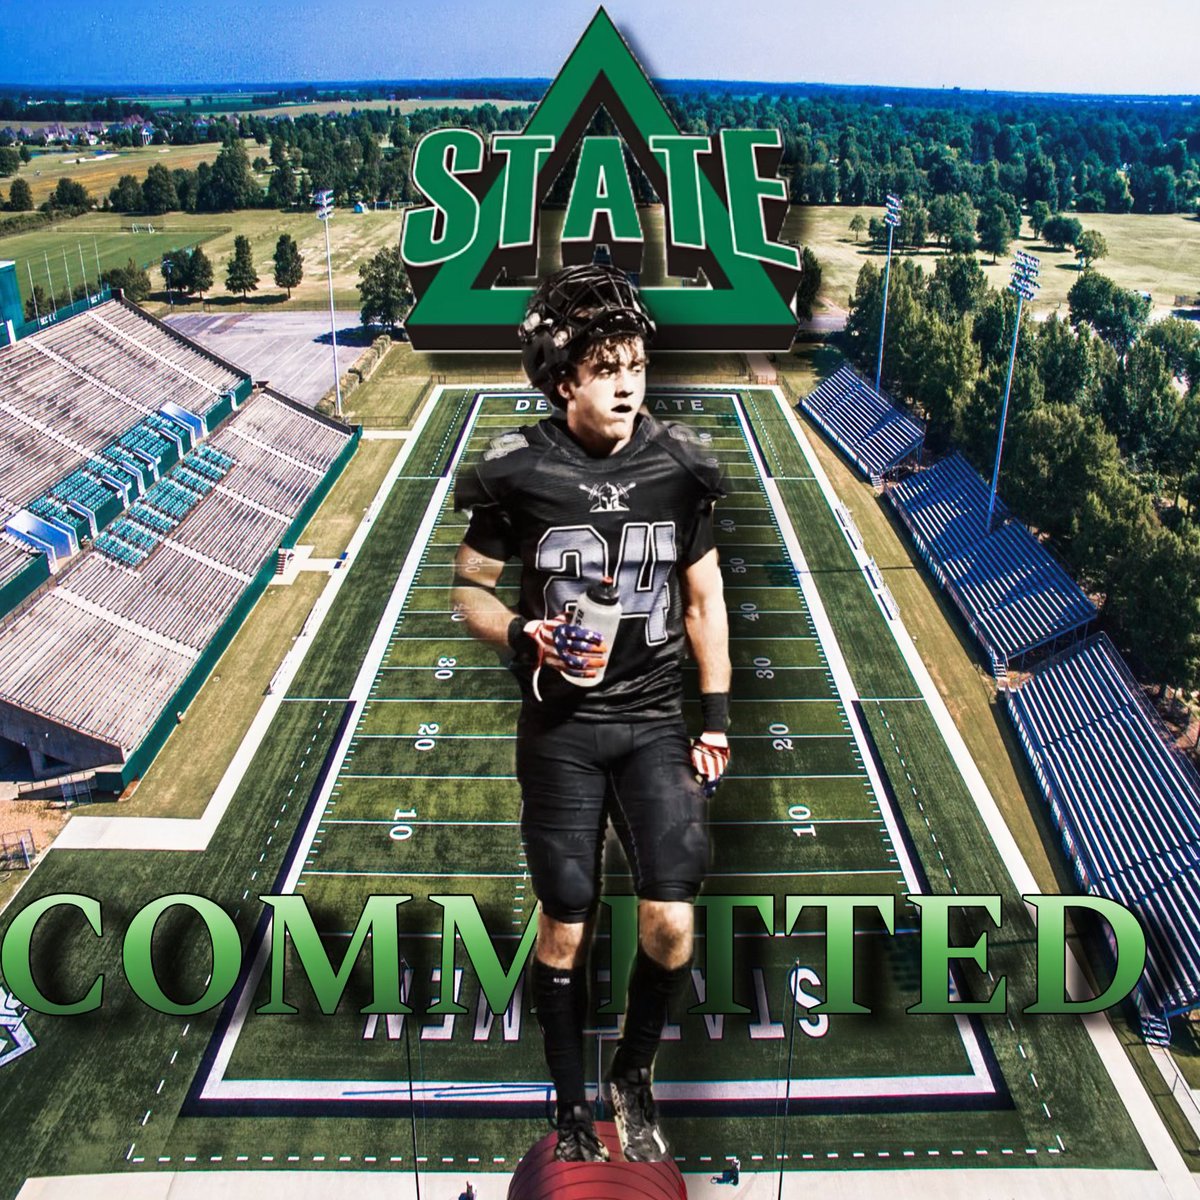 AGTG! After a great visit I’m excited to announce that I’m 100% committed to the University of Delta State! #Family @CoachToddCooley @CoachCaldwell83 @C_Alberswerth